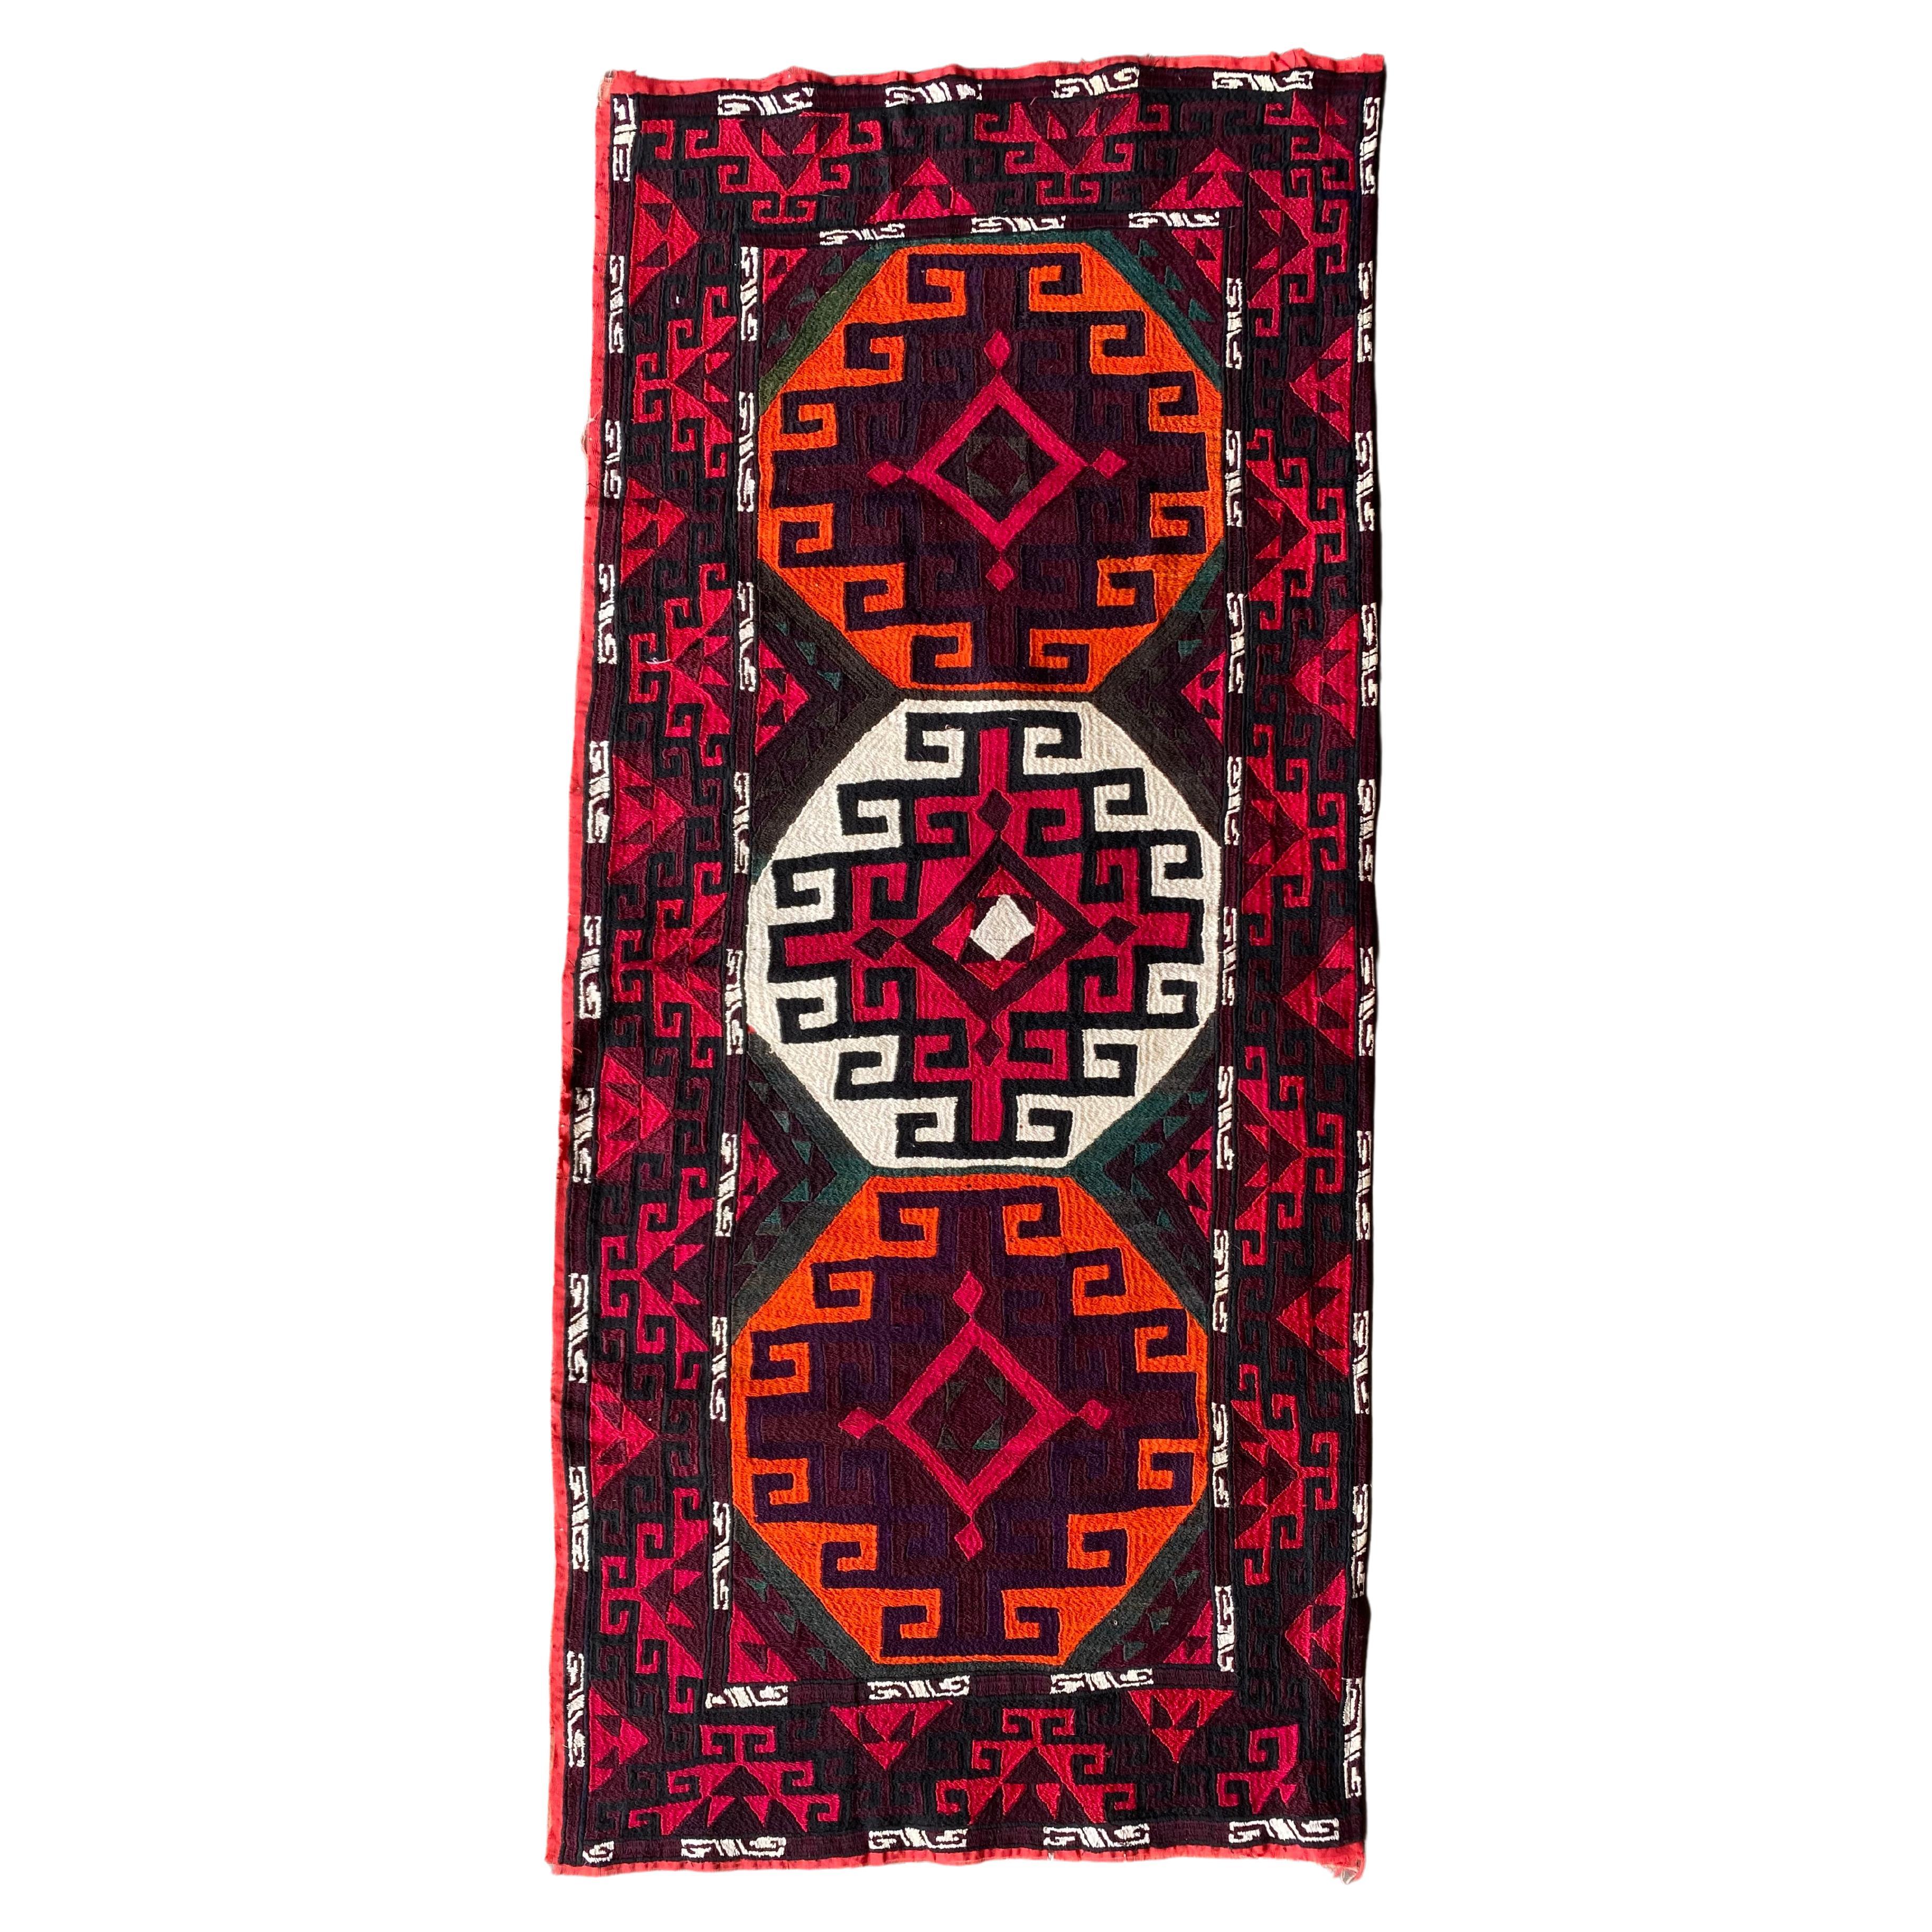 Central Asian Embroidered Textile, “Suzani”, Mid 20th Century  For Sale